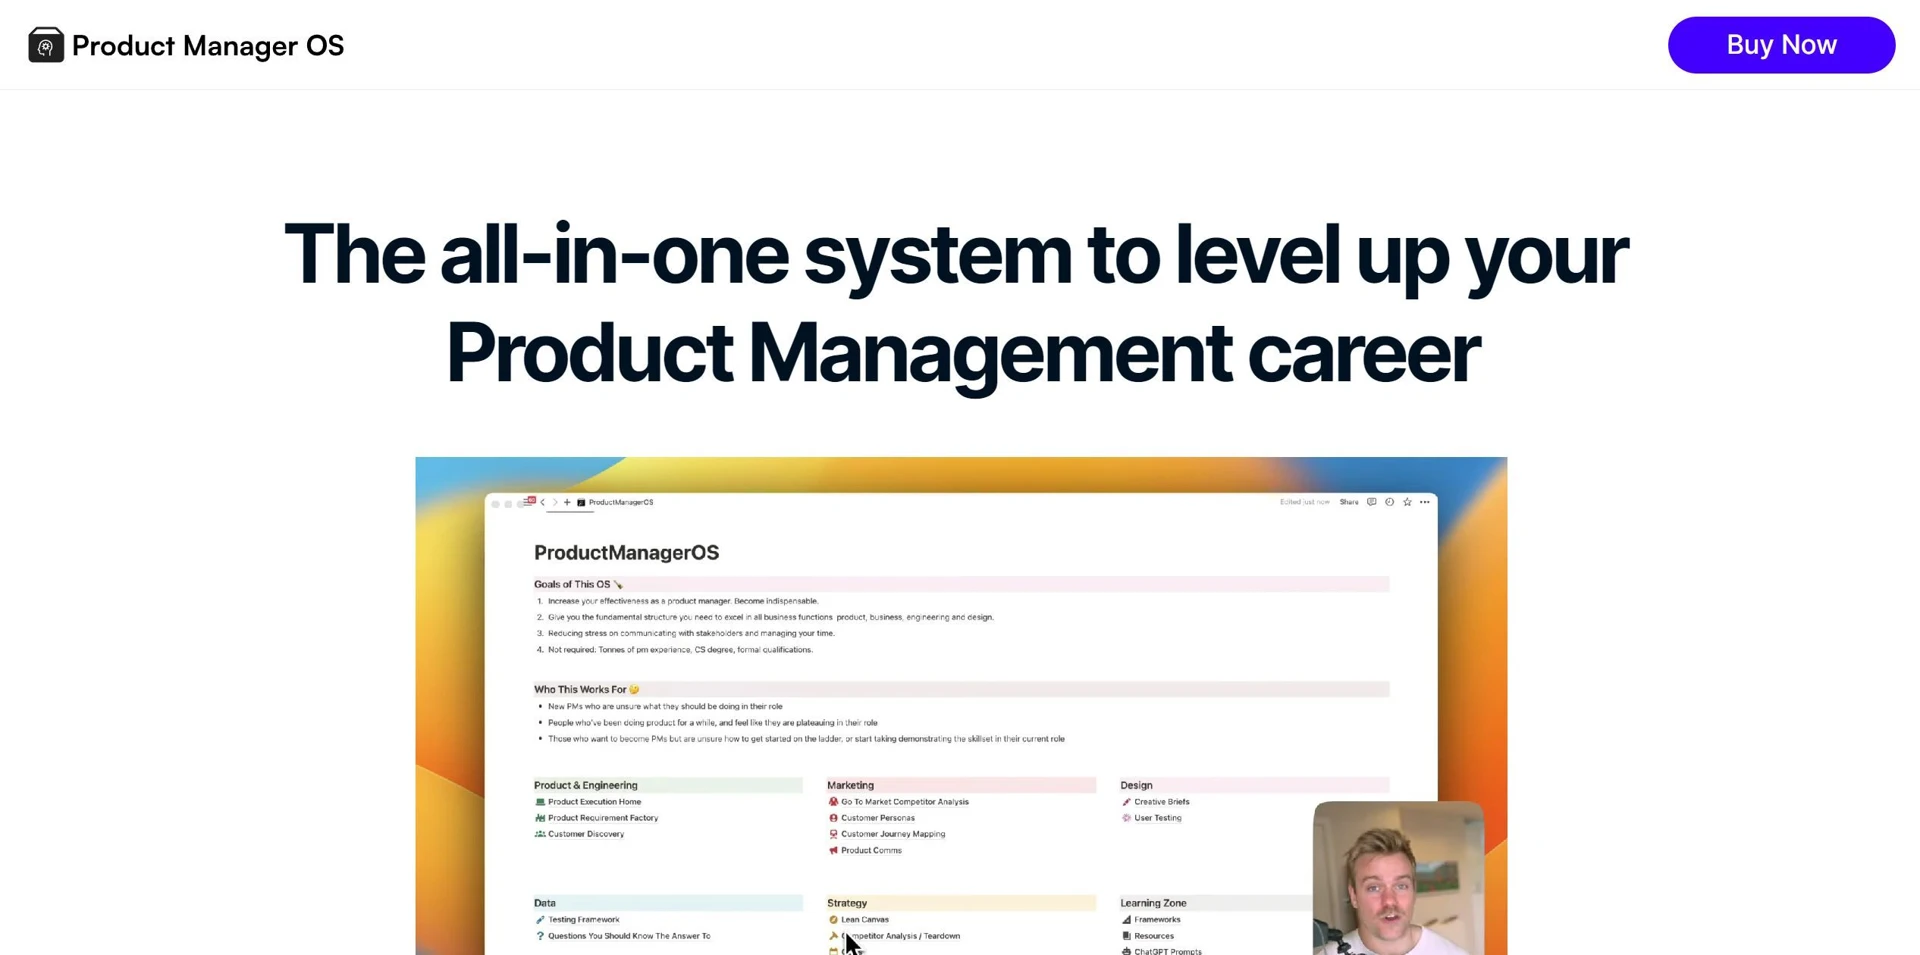 Product Manager OSwebsite picture